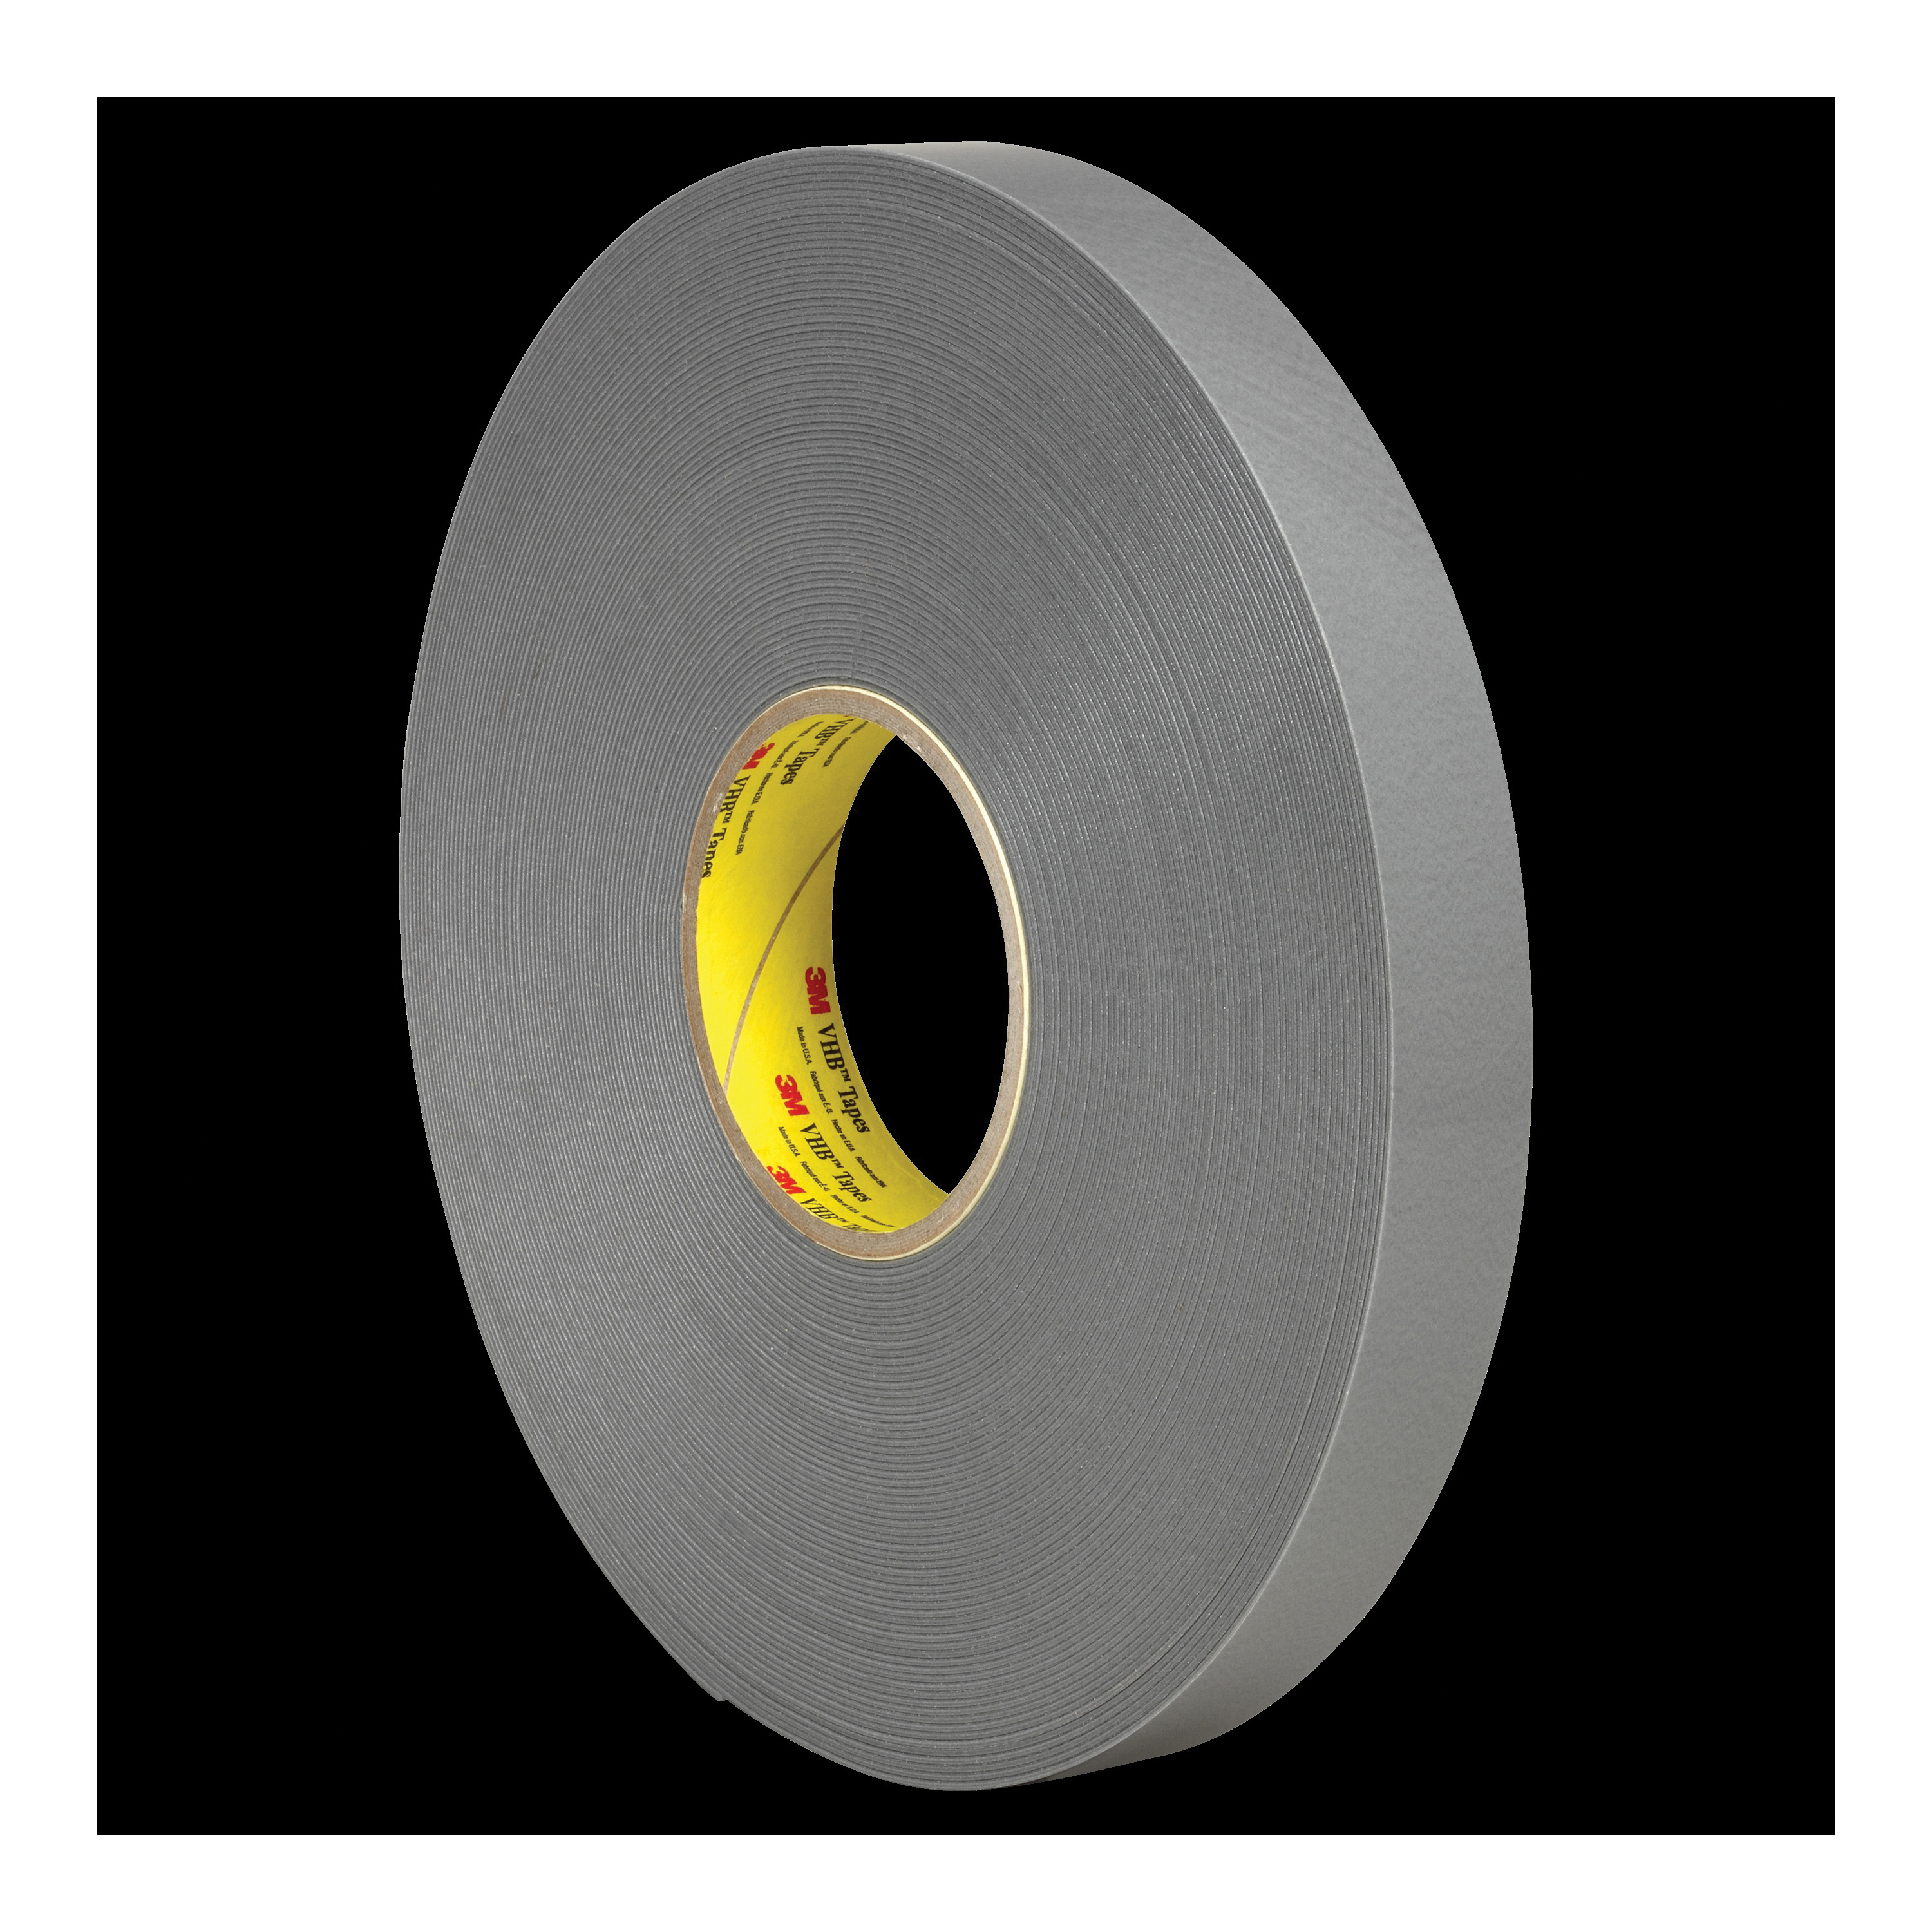 3M™ VHB™ 021200-30566 Pressure Sensitive Double Sided Bonding Tape, 36 yd L x 3/4 in W, 0.045 in THK, Low Temperature Acrylic Adhesive, Acrylic Foam Backing, Gray